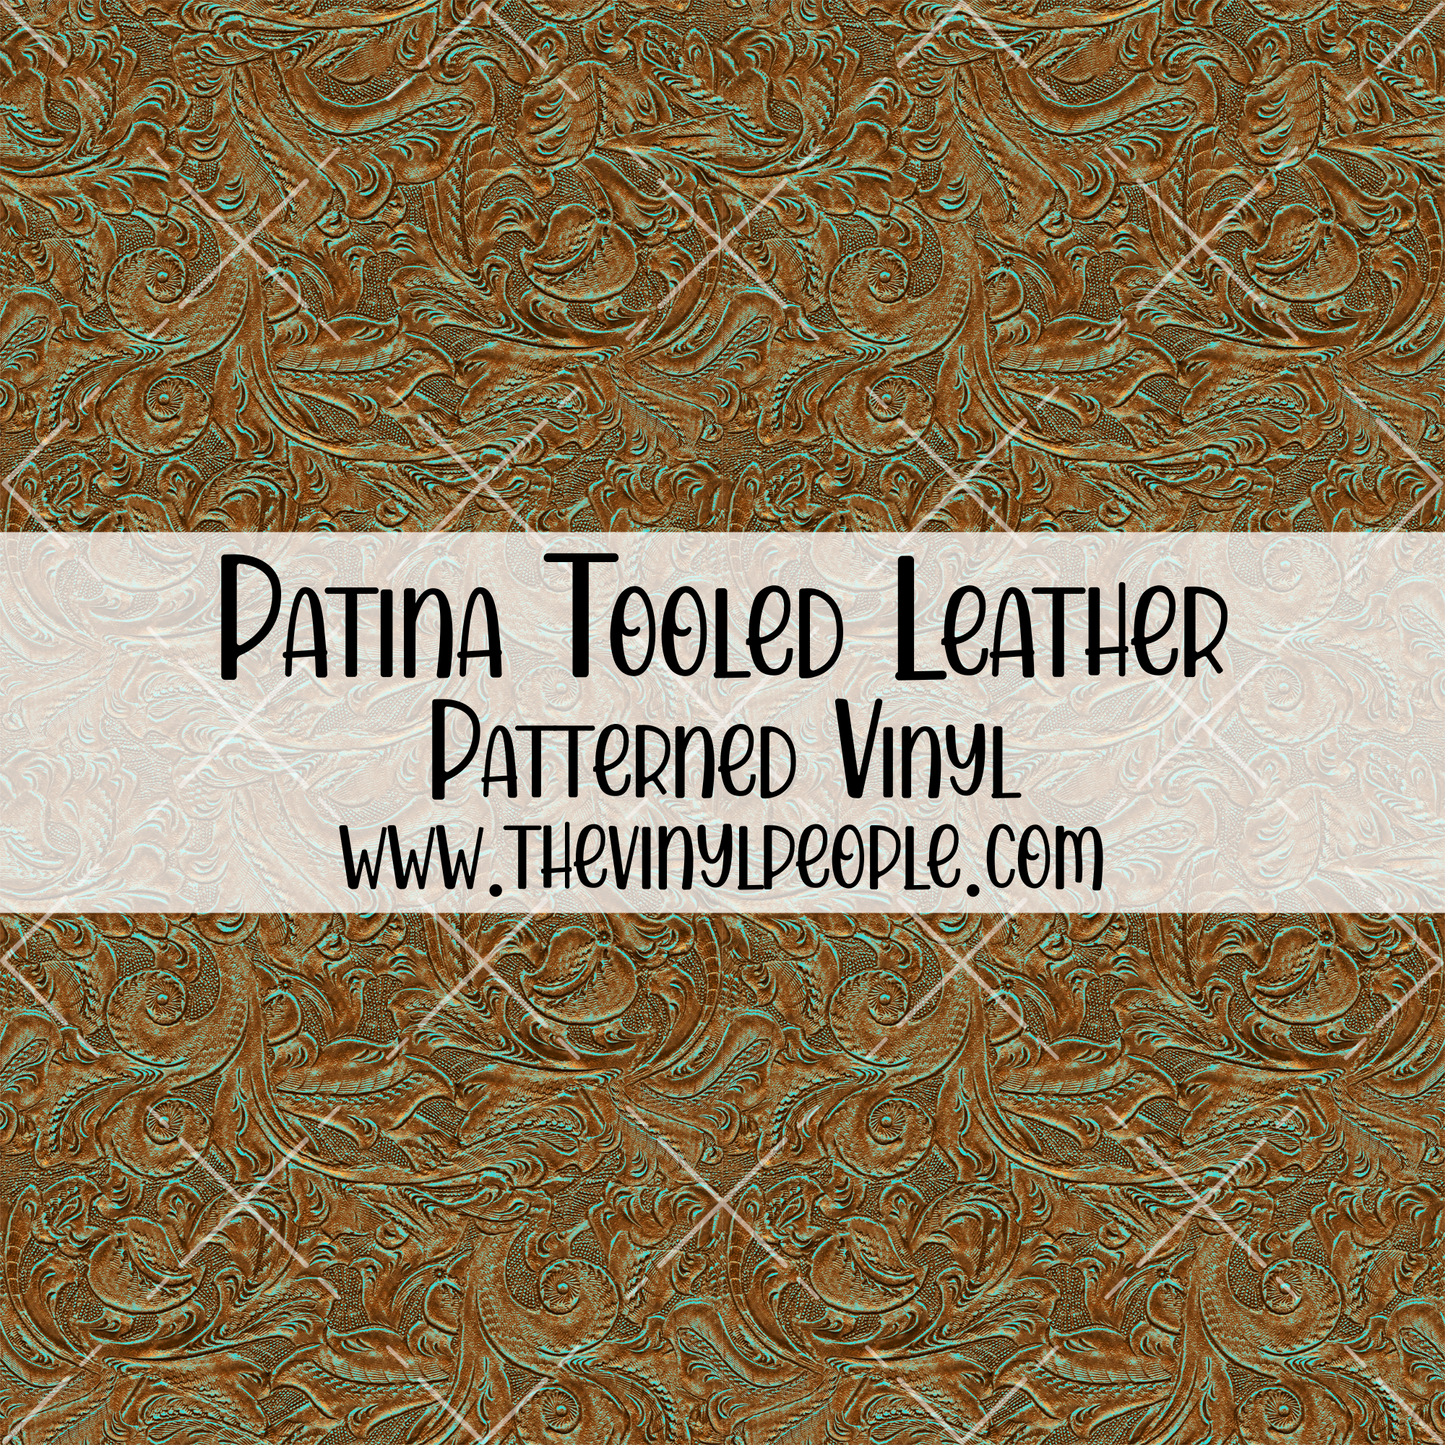 Patina Tooled Leather Patterned Vinyl